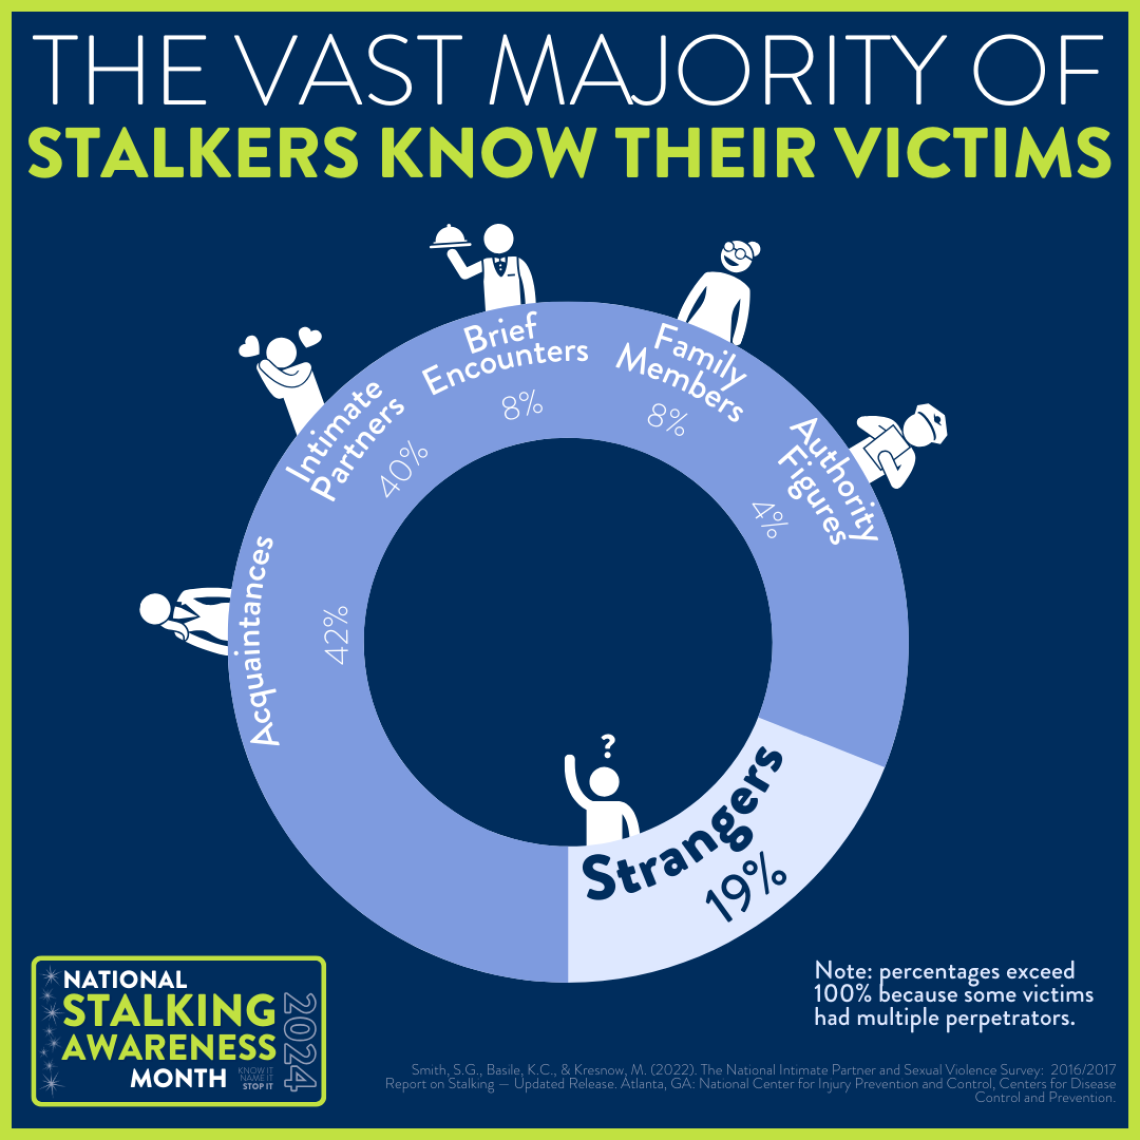 A graph showing that only 19% of stalkers are complete strangers to the victim.